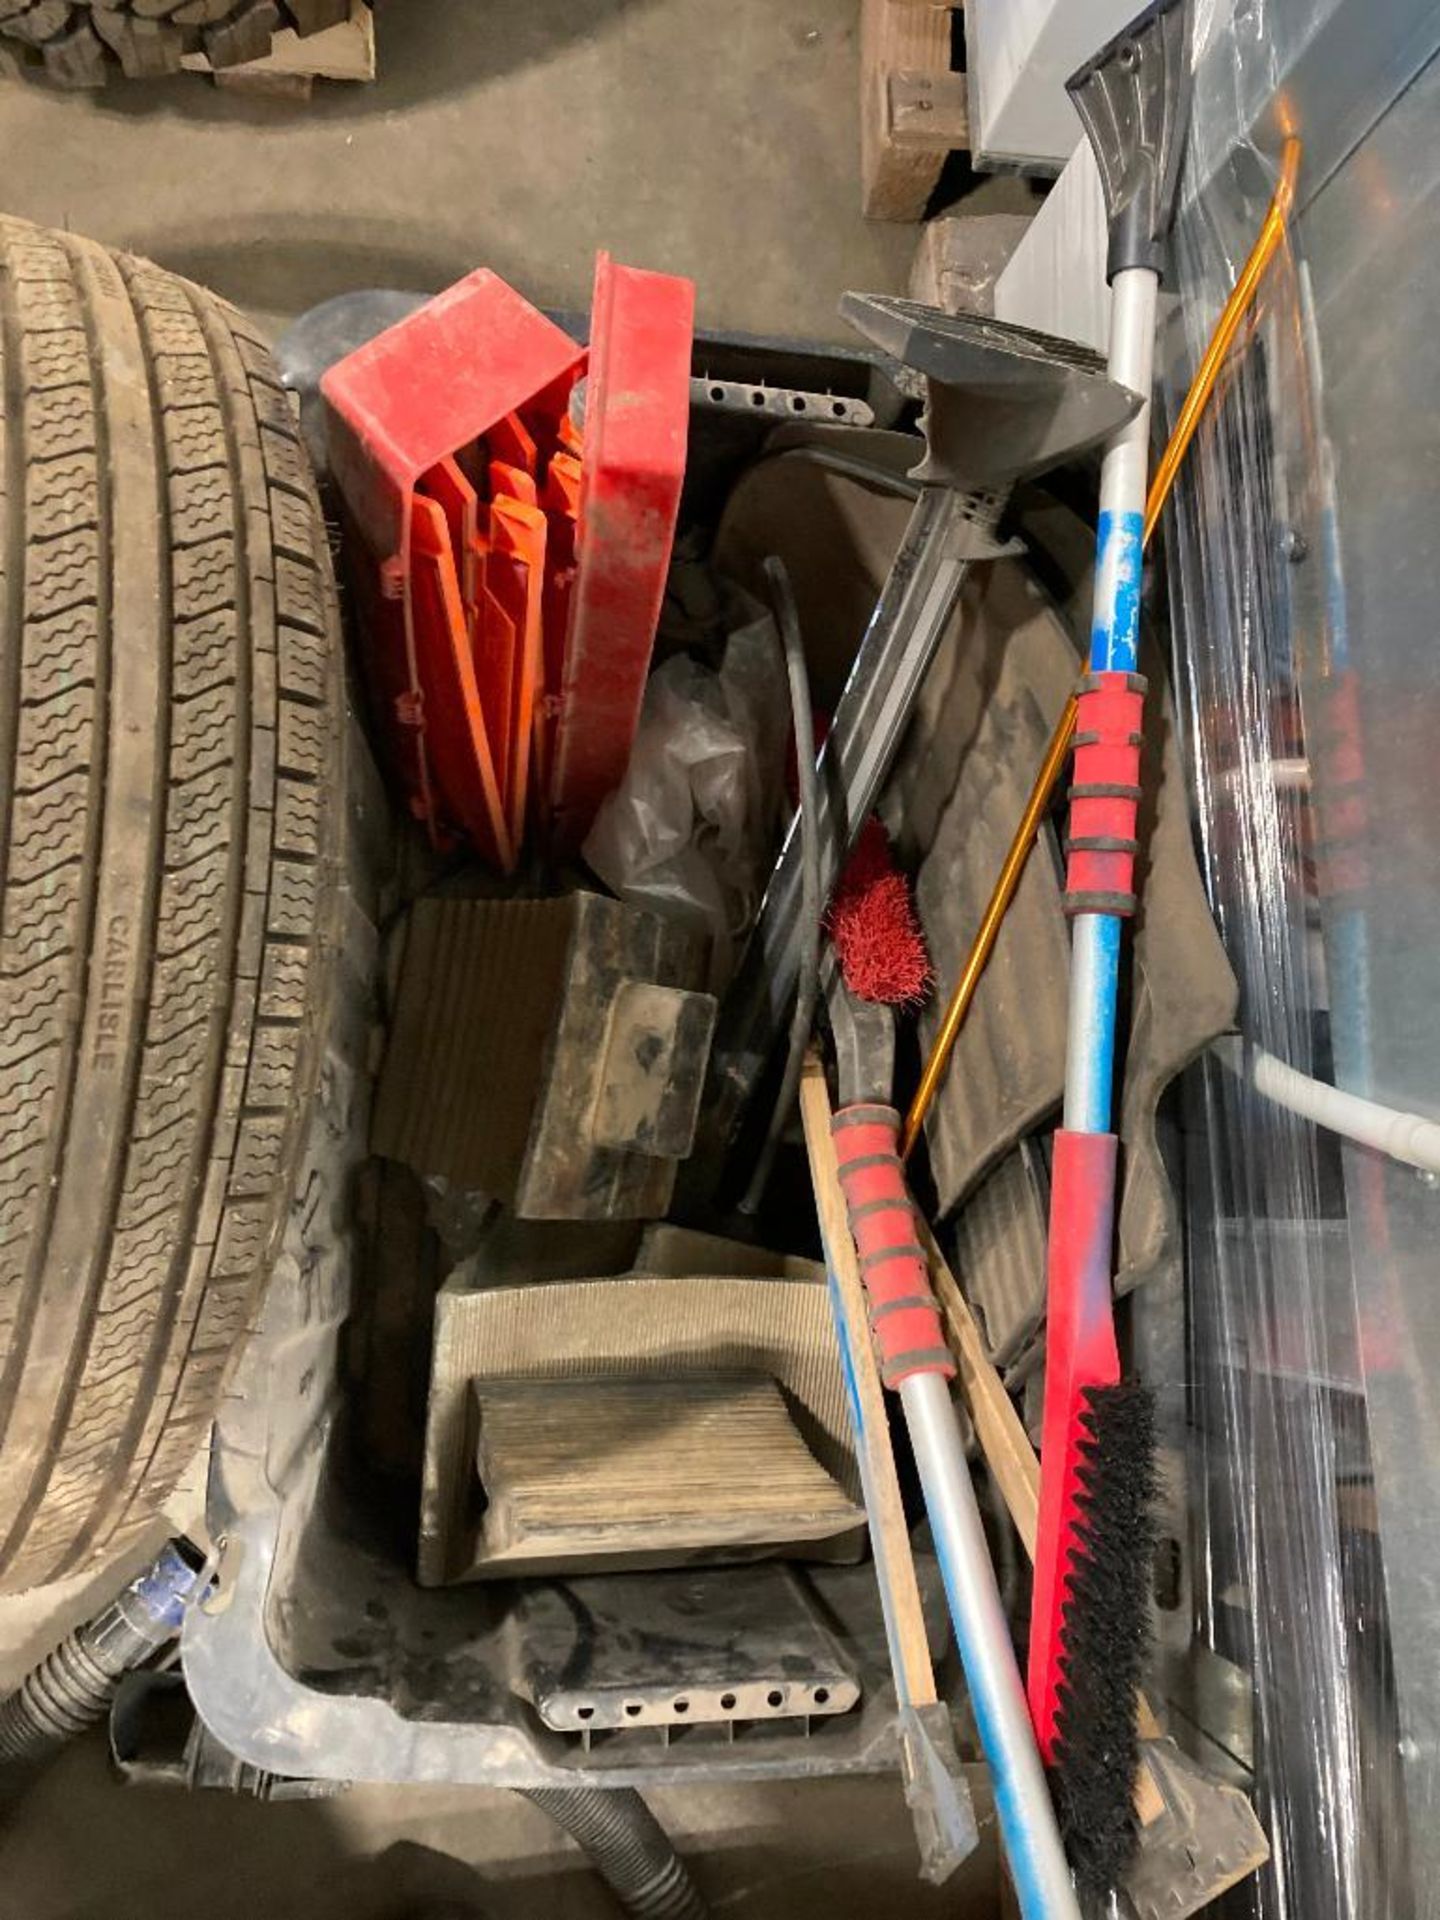 Lot of (2) Asst. Tires and Asst. Wire Brushes, Snow Brushes, Chock Blocks, Road Flares, etc - Image 4 of 5